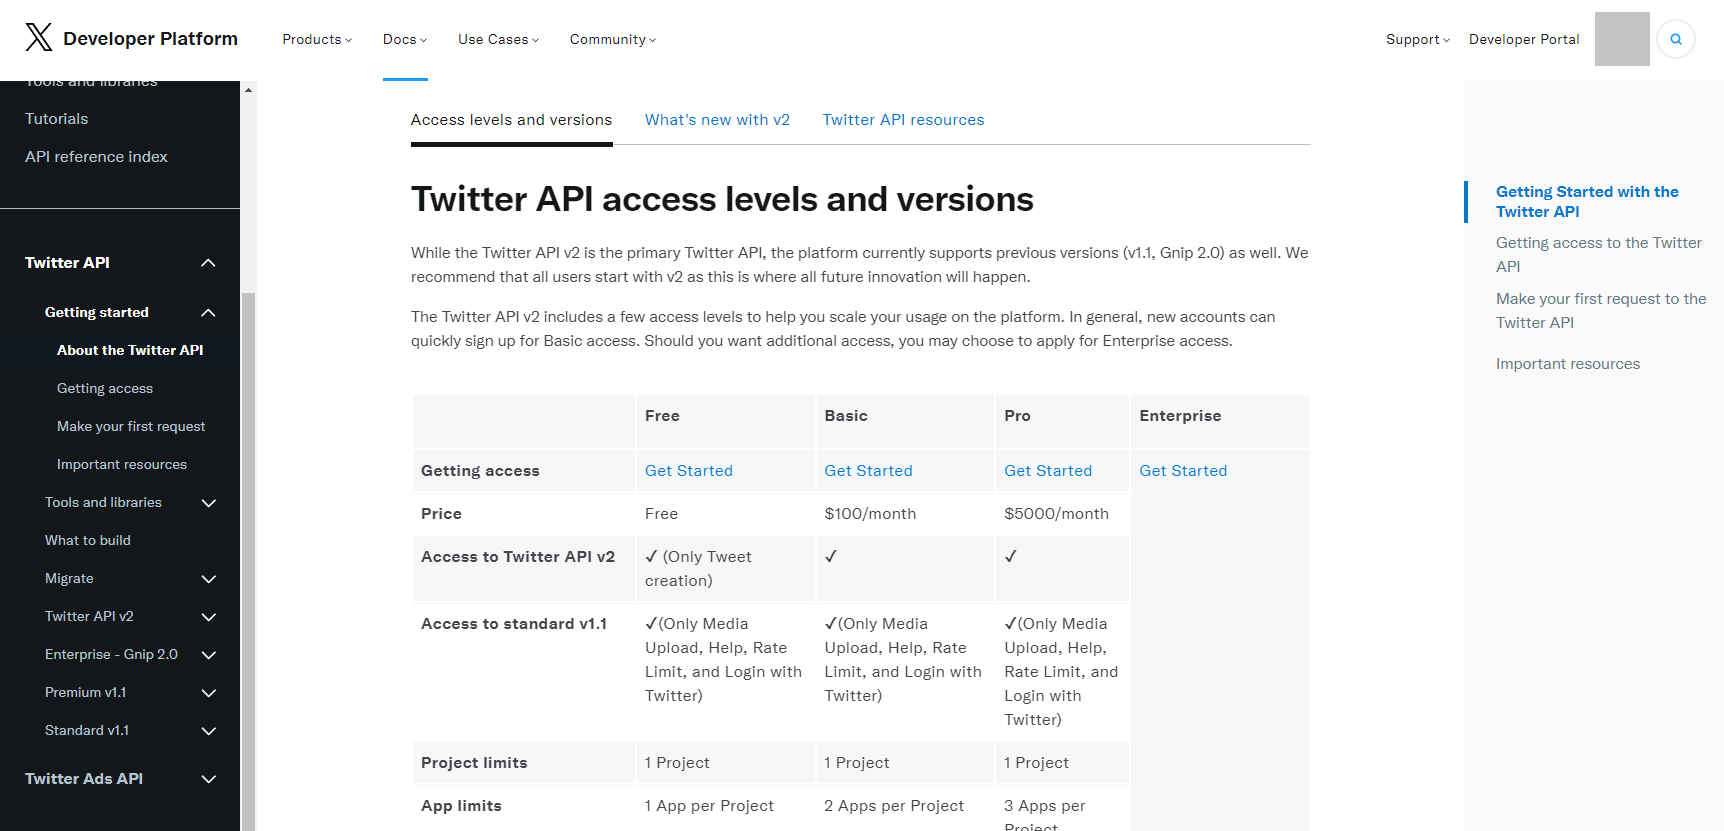 Twitter API access levels and versions